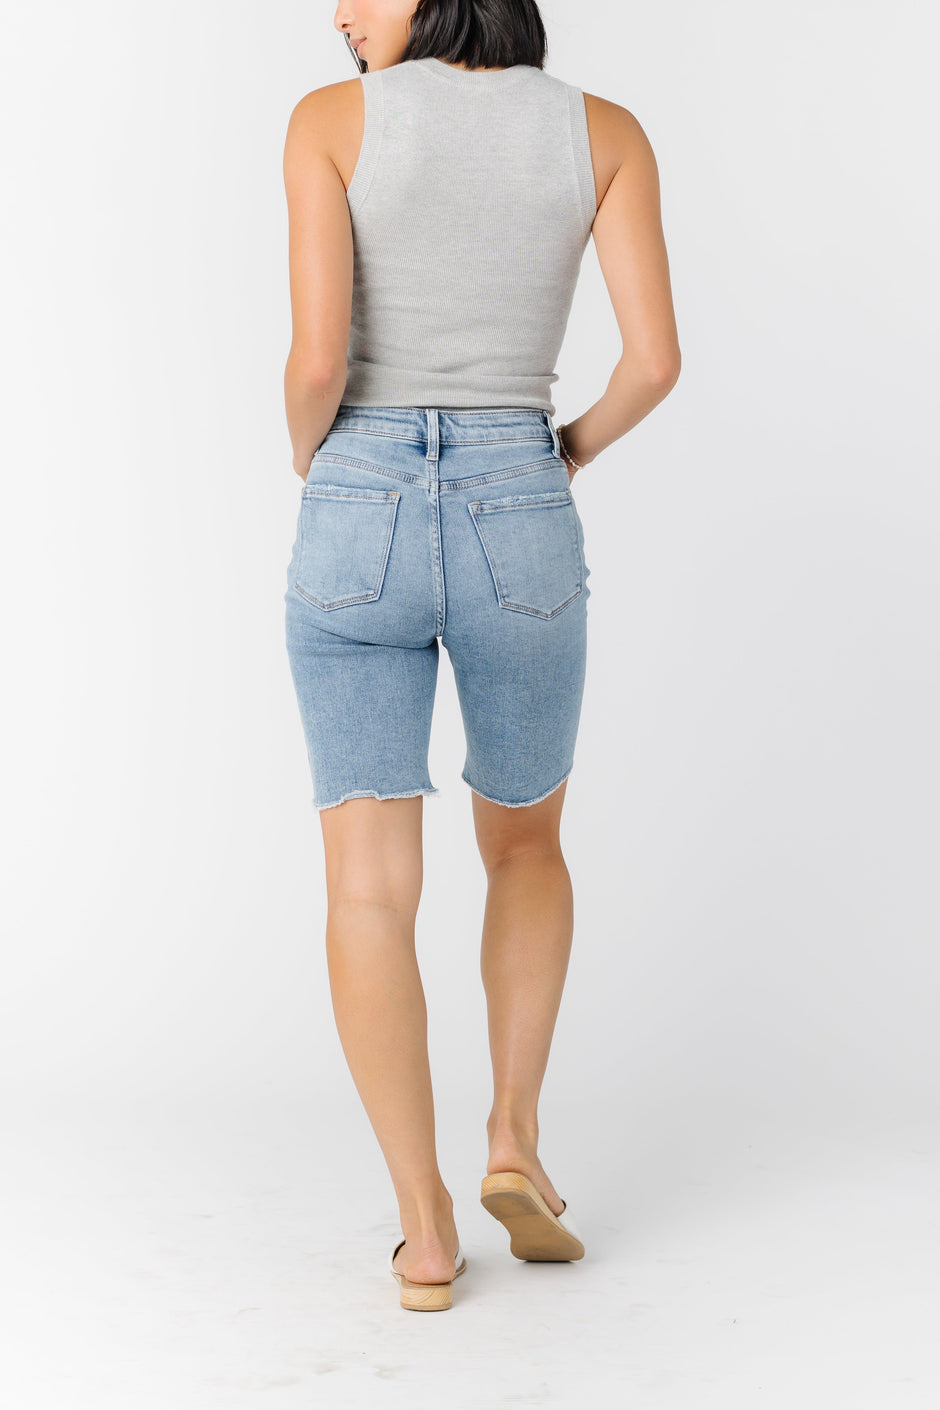 Women's Shorts – Called to Surf